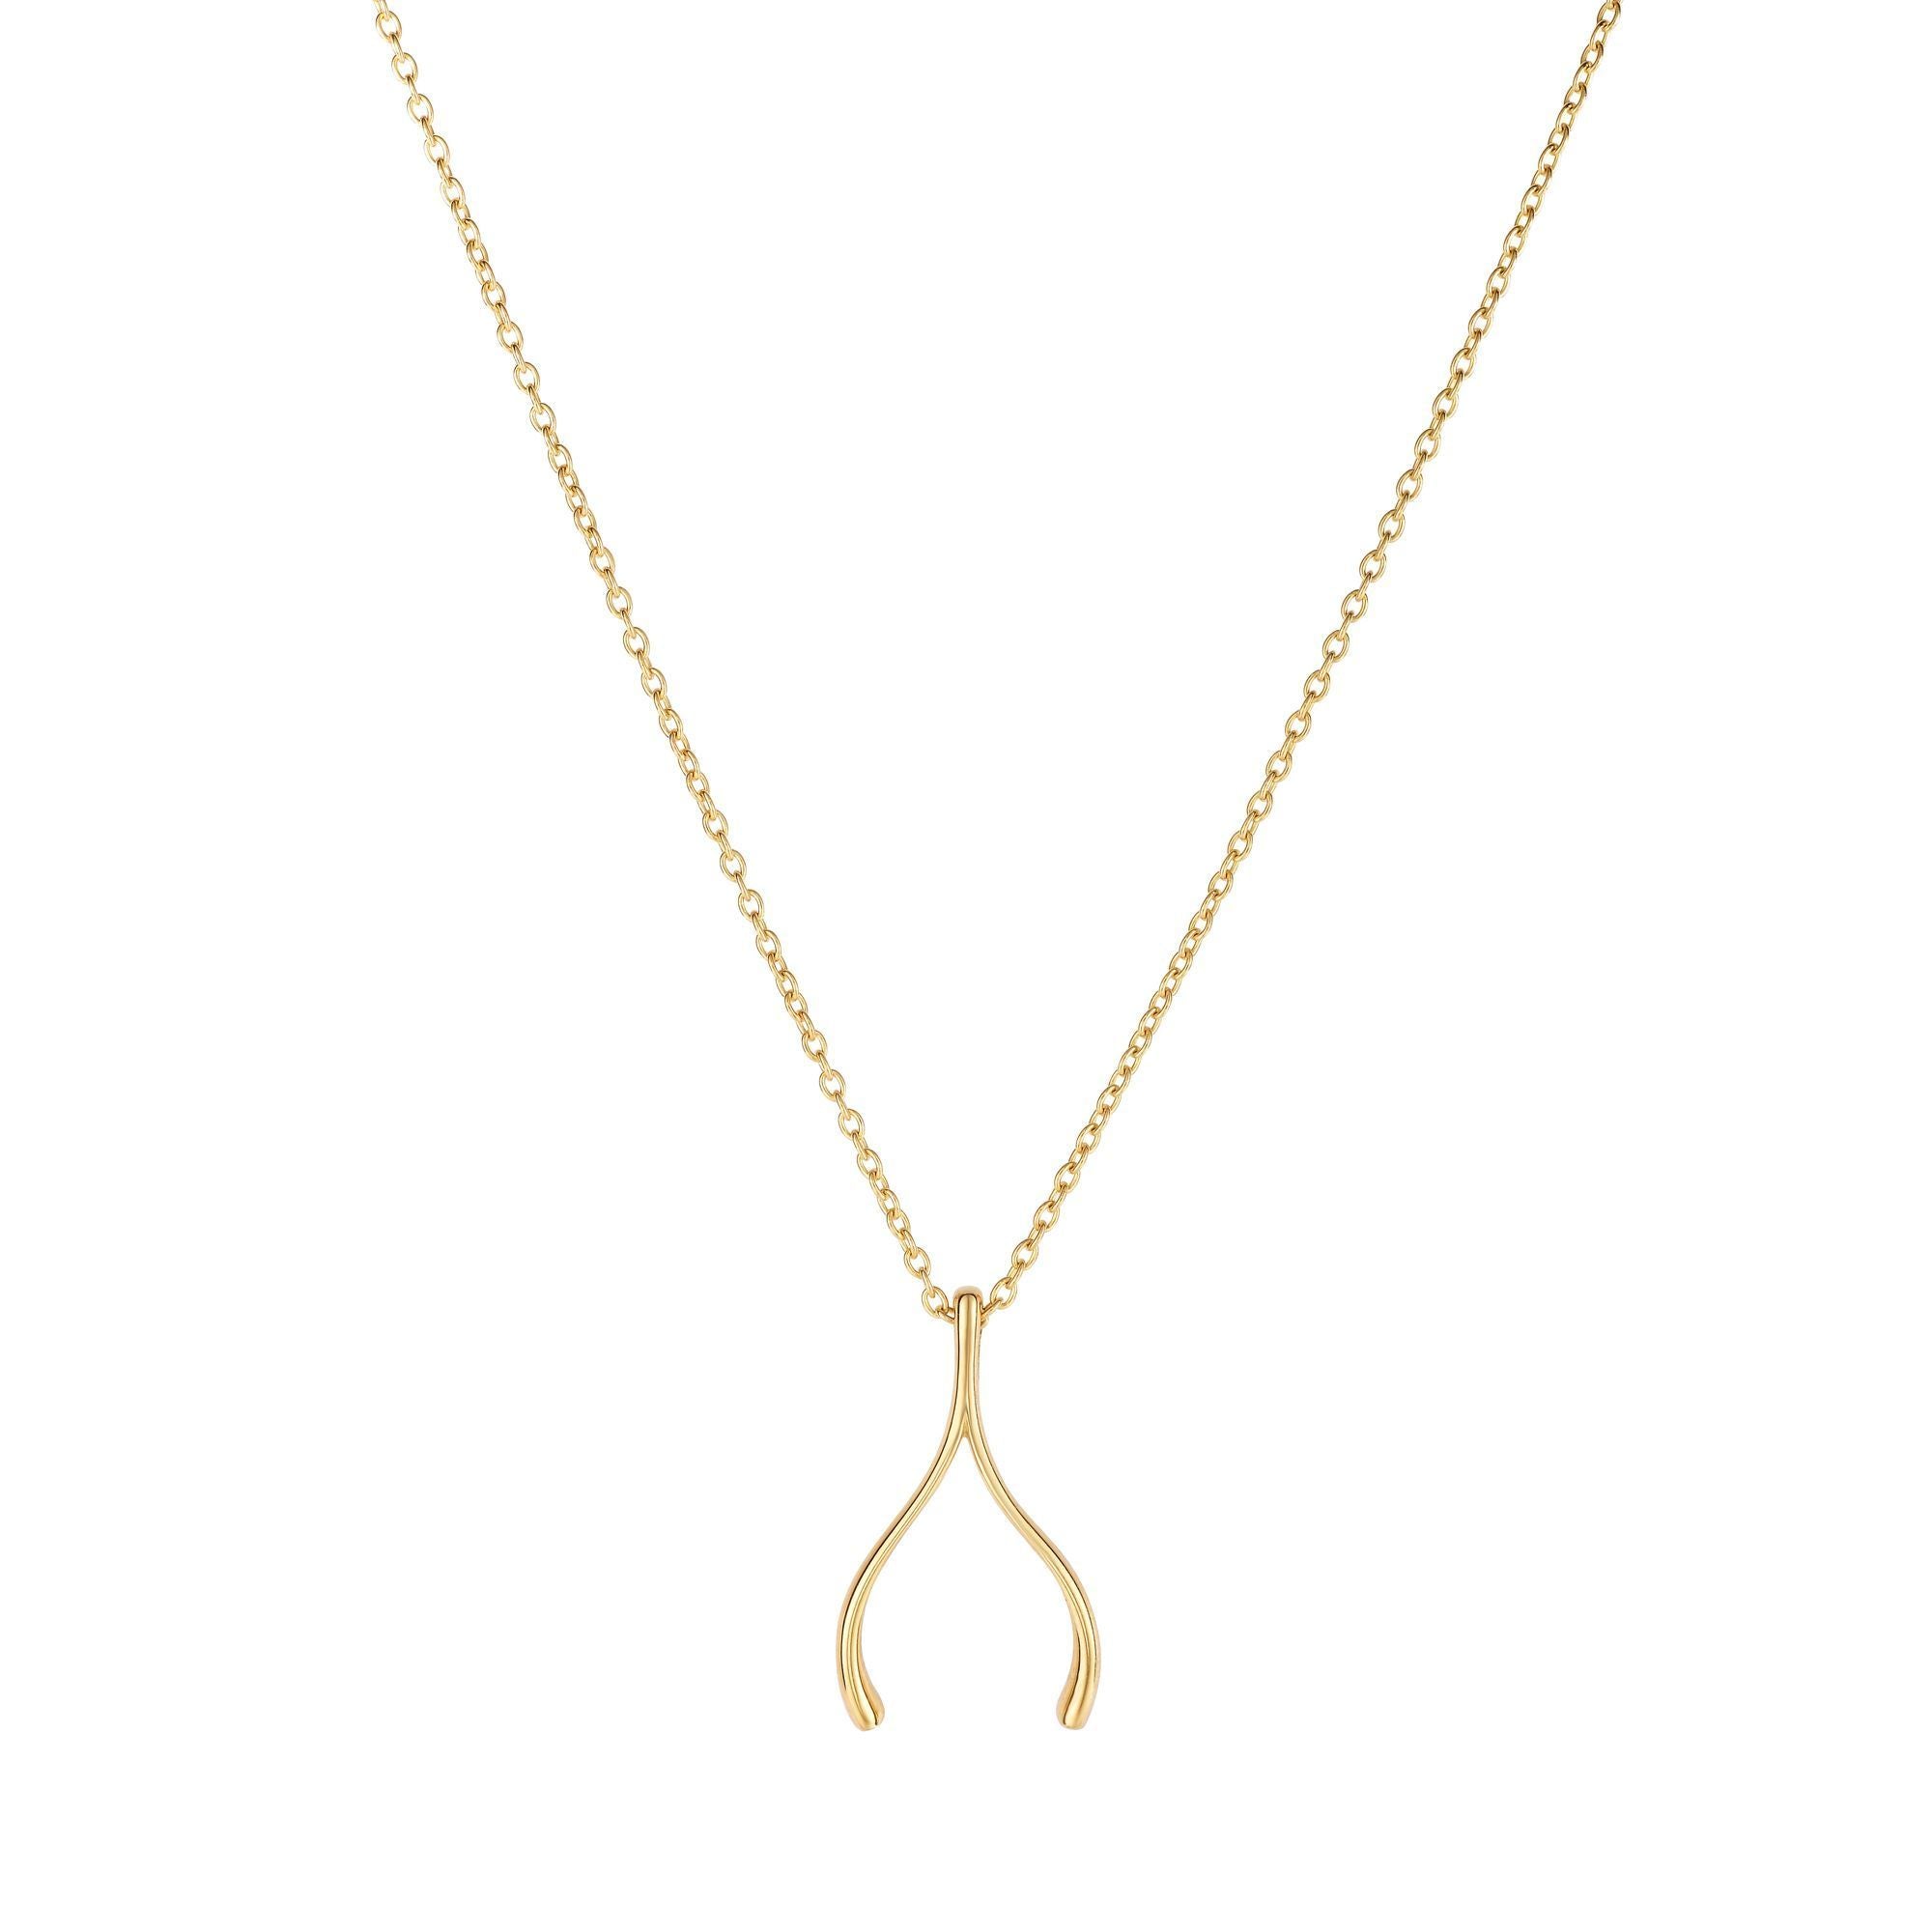 Minimalist Wishbone Charm Necklace with 17"Oval Link Cable Chain - wingroupjewelry